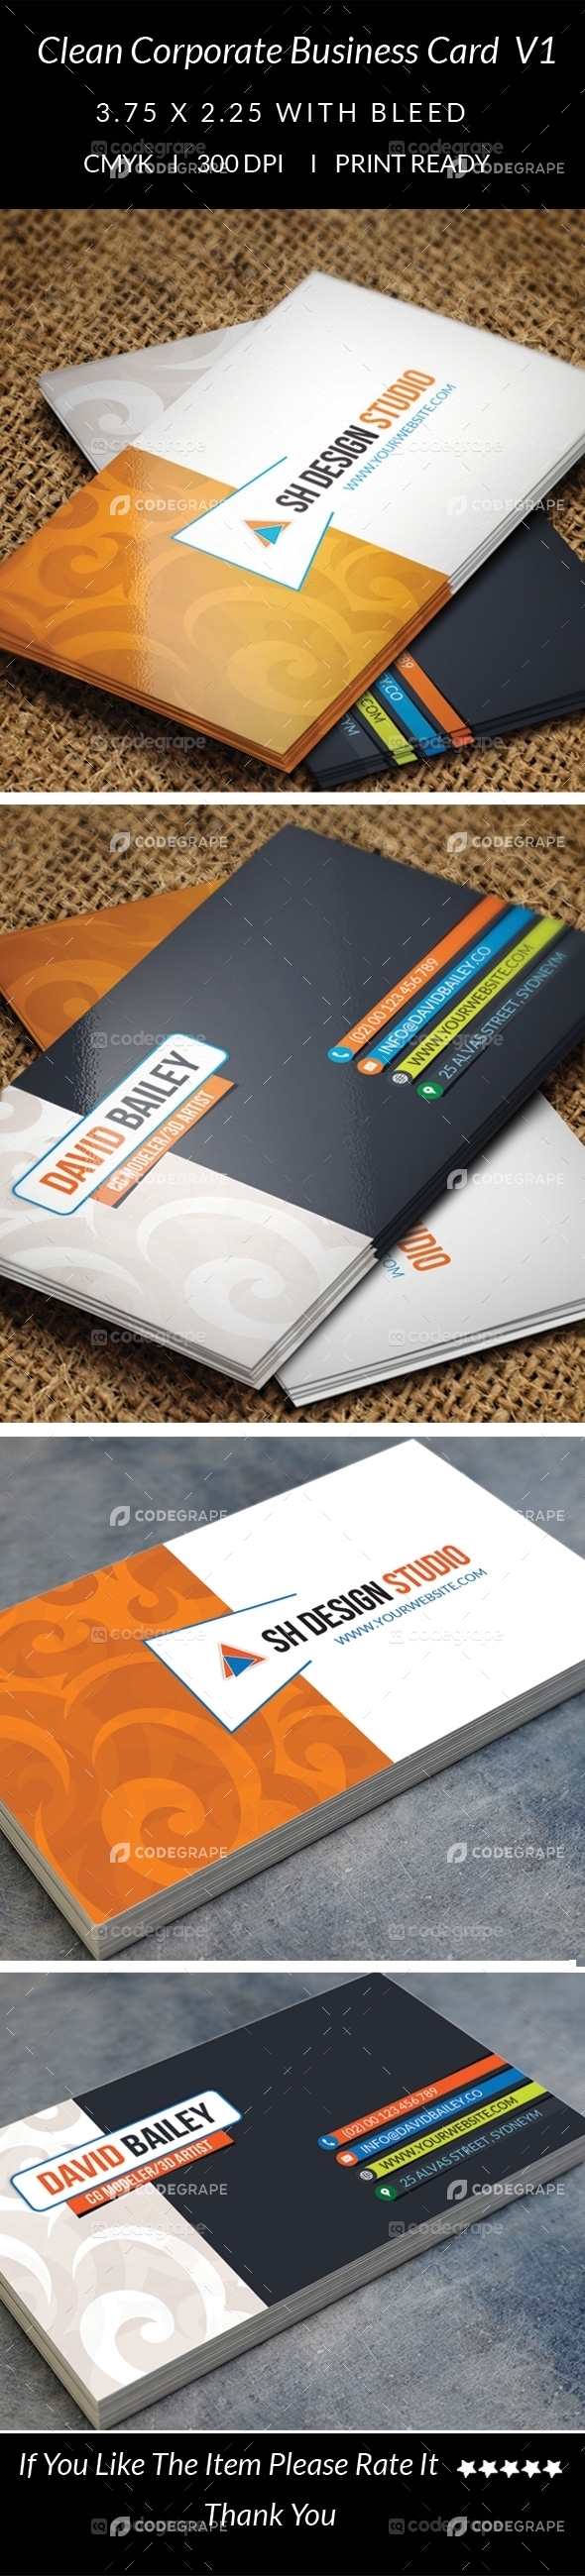 Clean Corporate Business Card V1